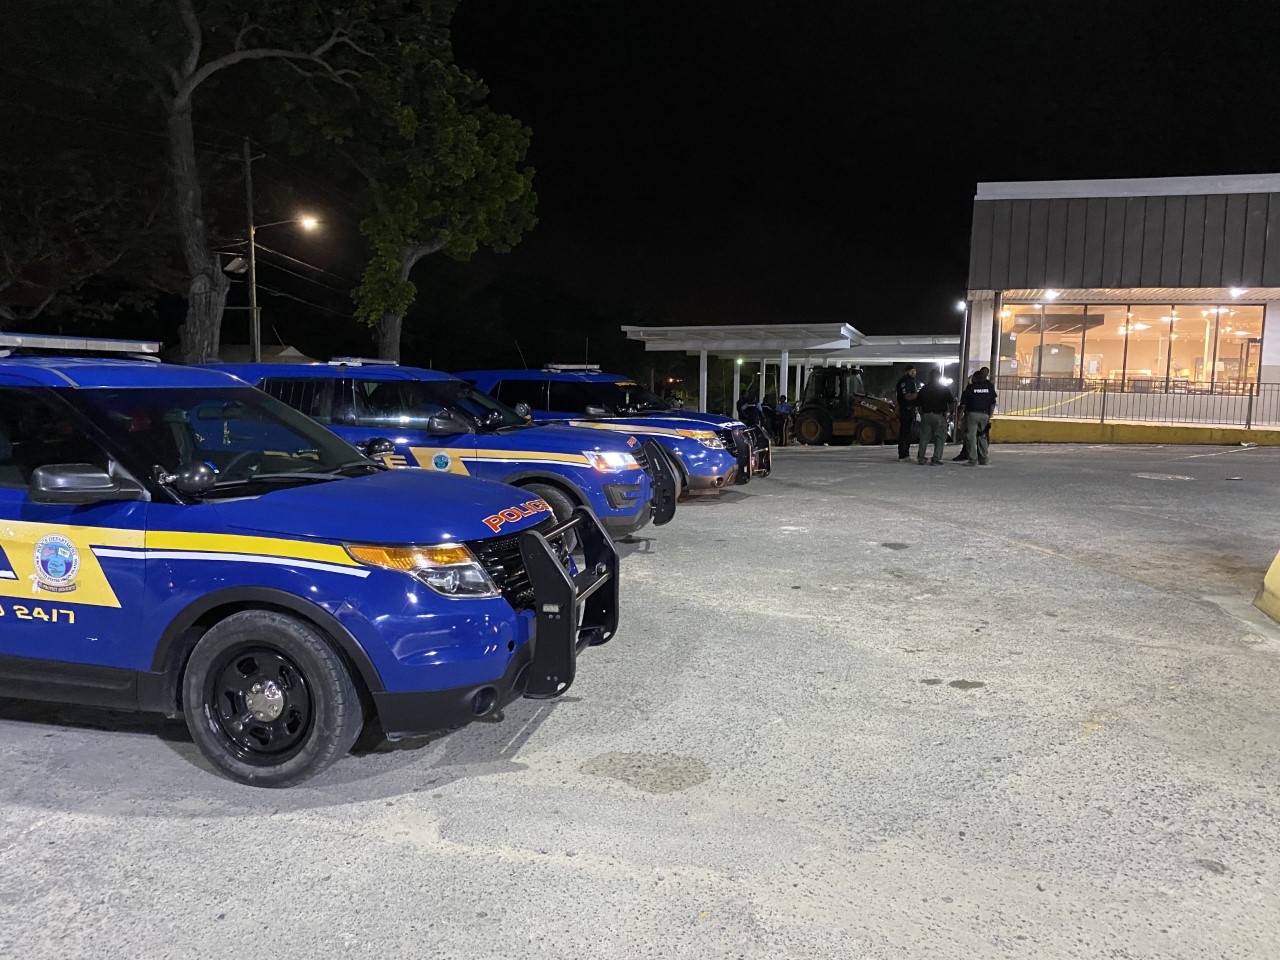 St. Croix Men Jump Out Of SUV And Start Shooting People In Supermarket Parking Lot: VIPD